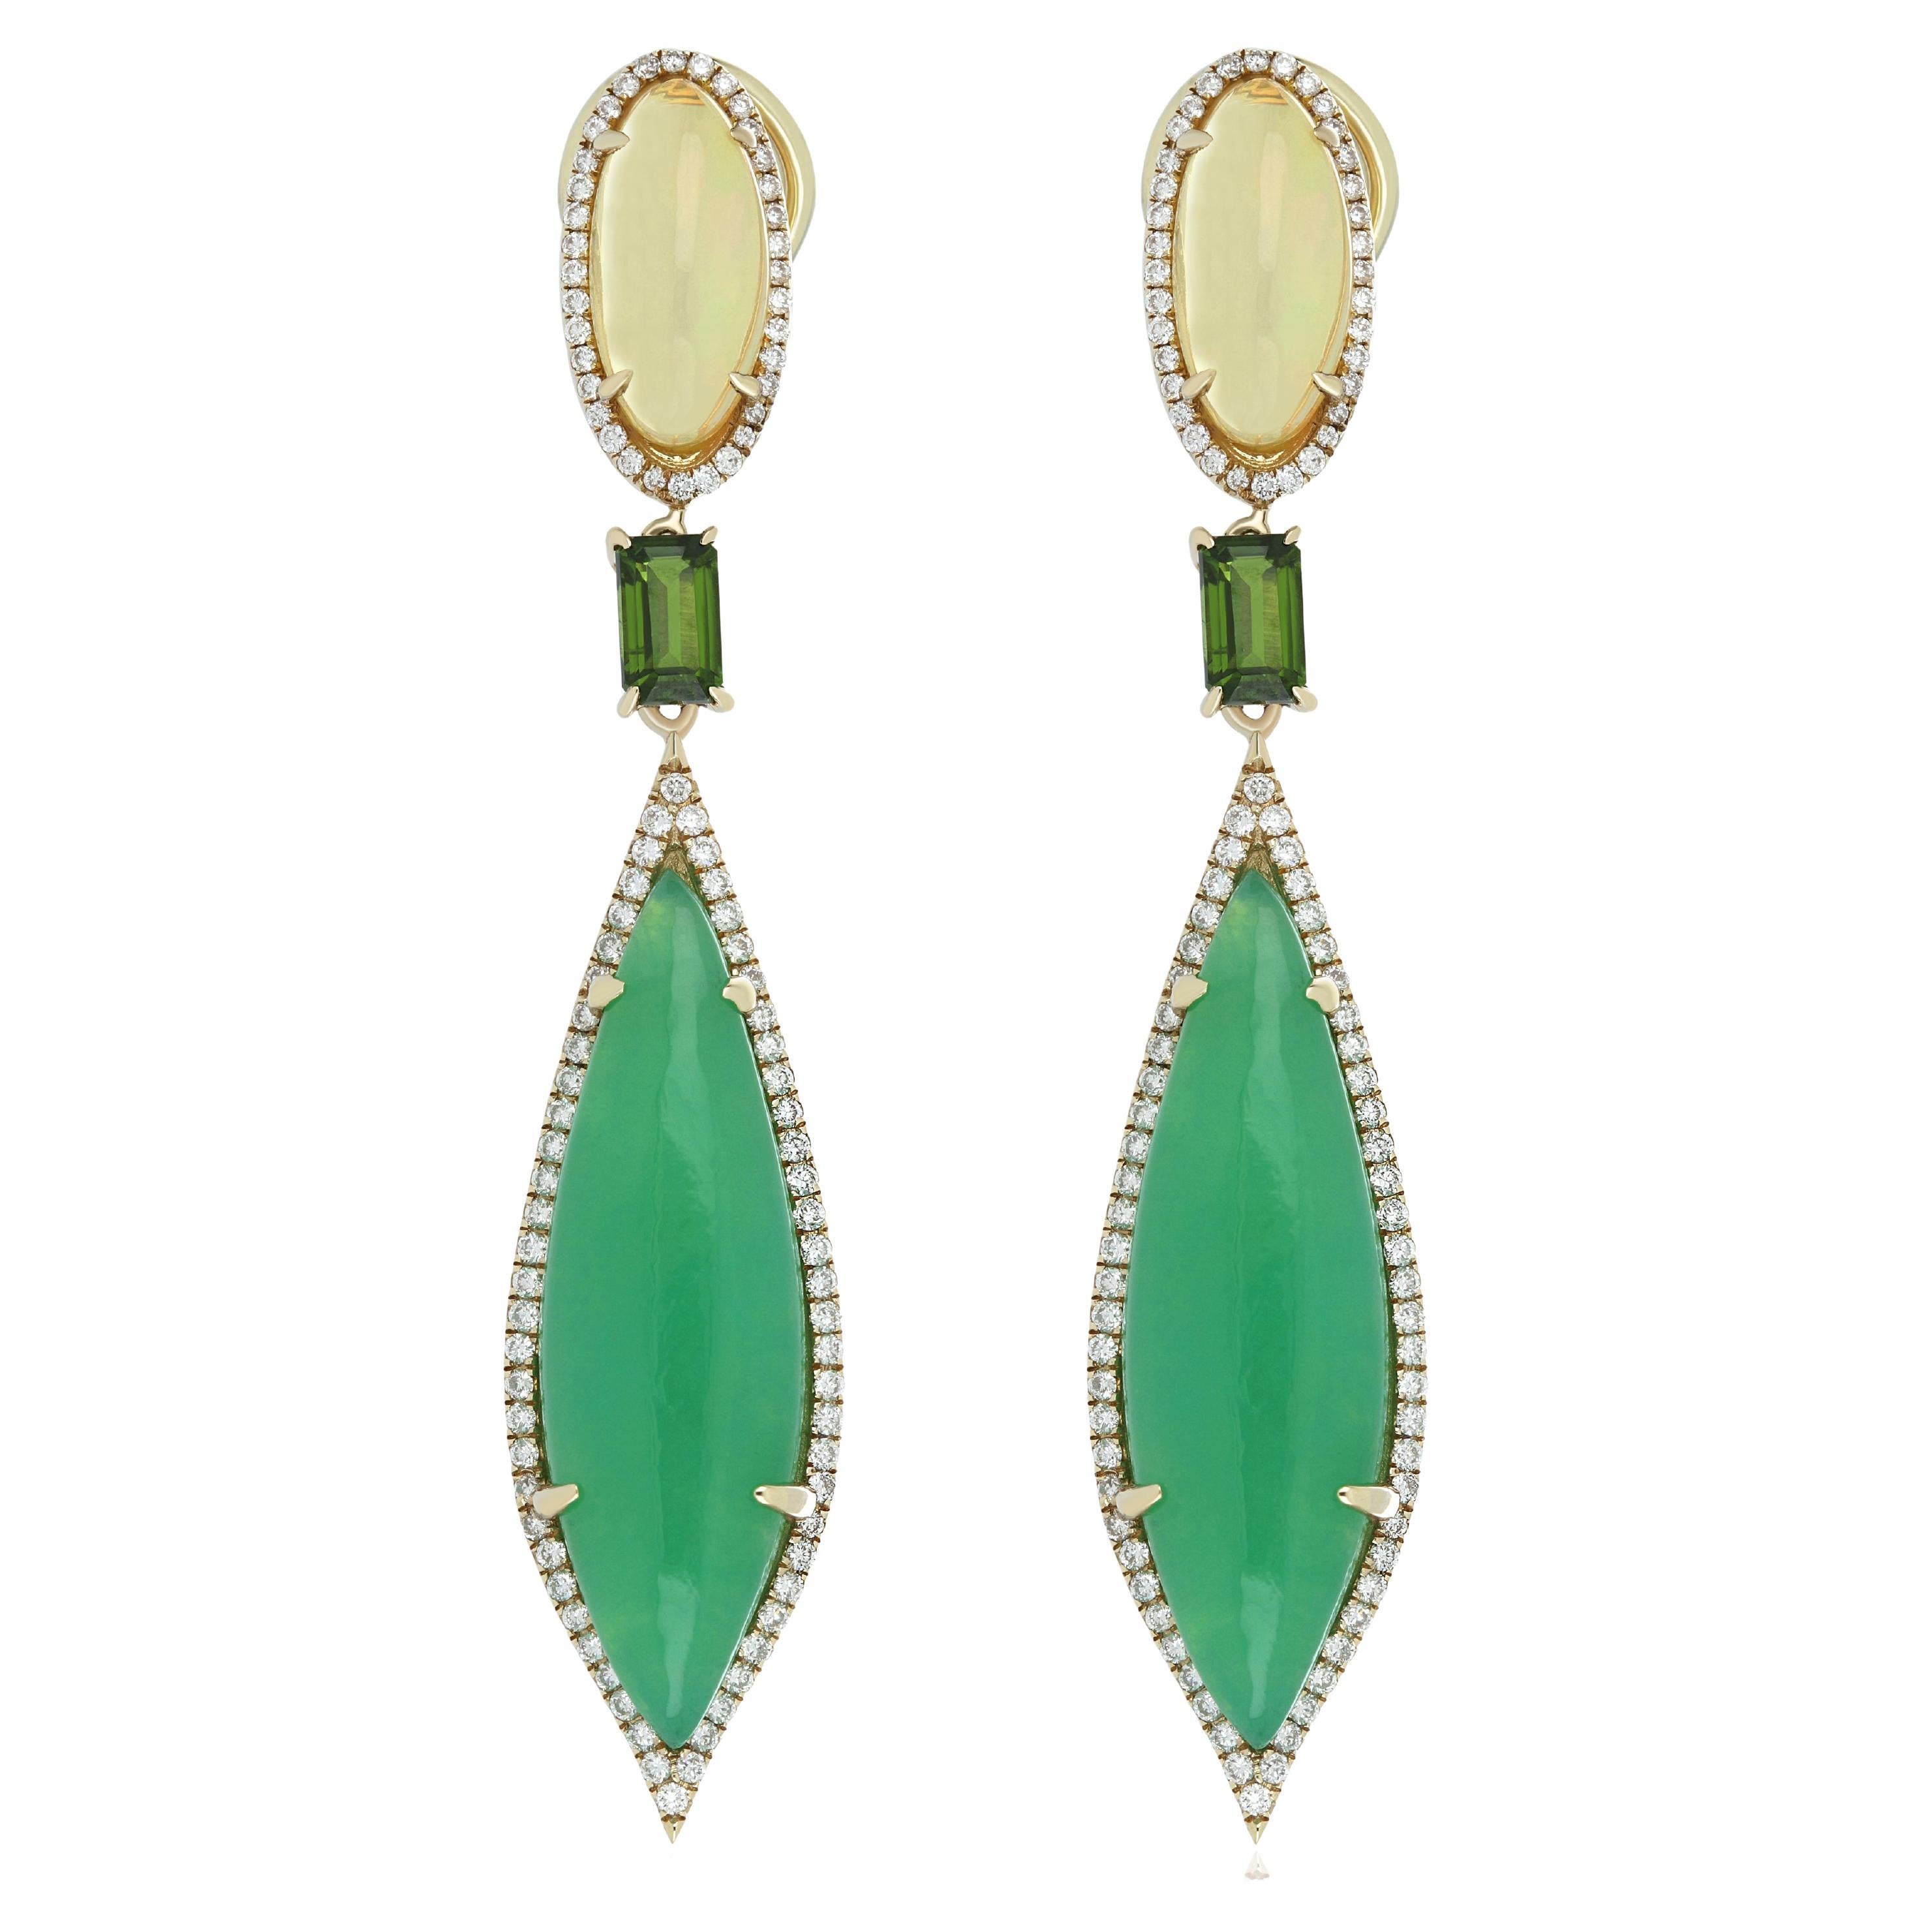 Chrysoprase, Opal, Chrome and Diamond Studded Earring in 14 Karat Yellow Gold